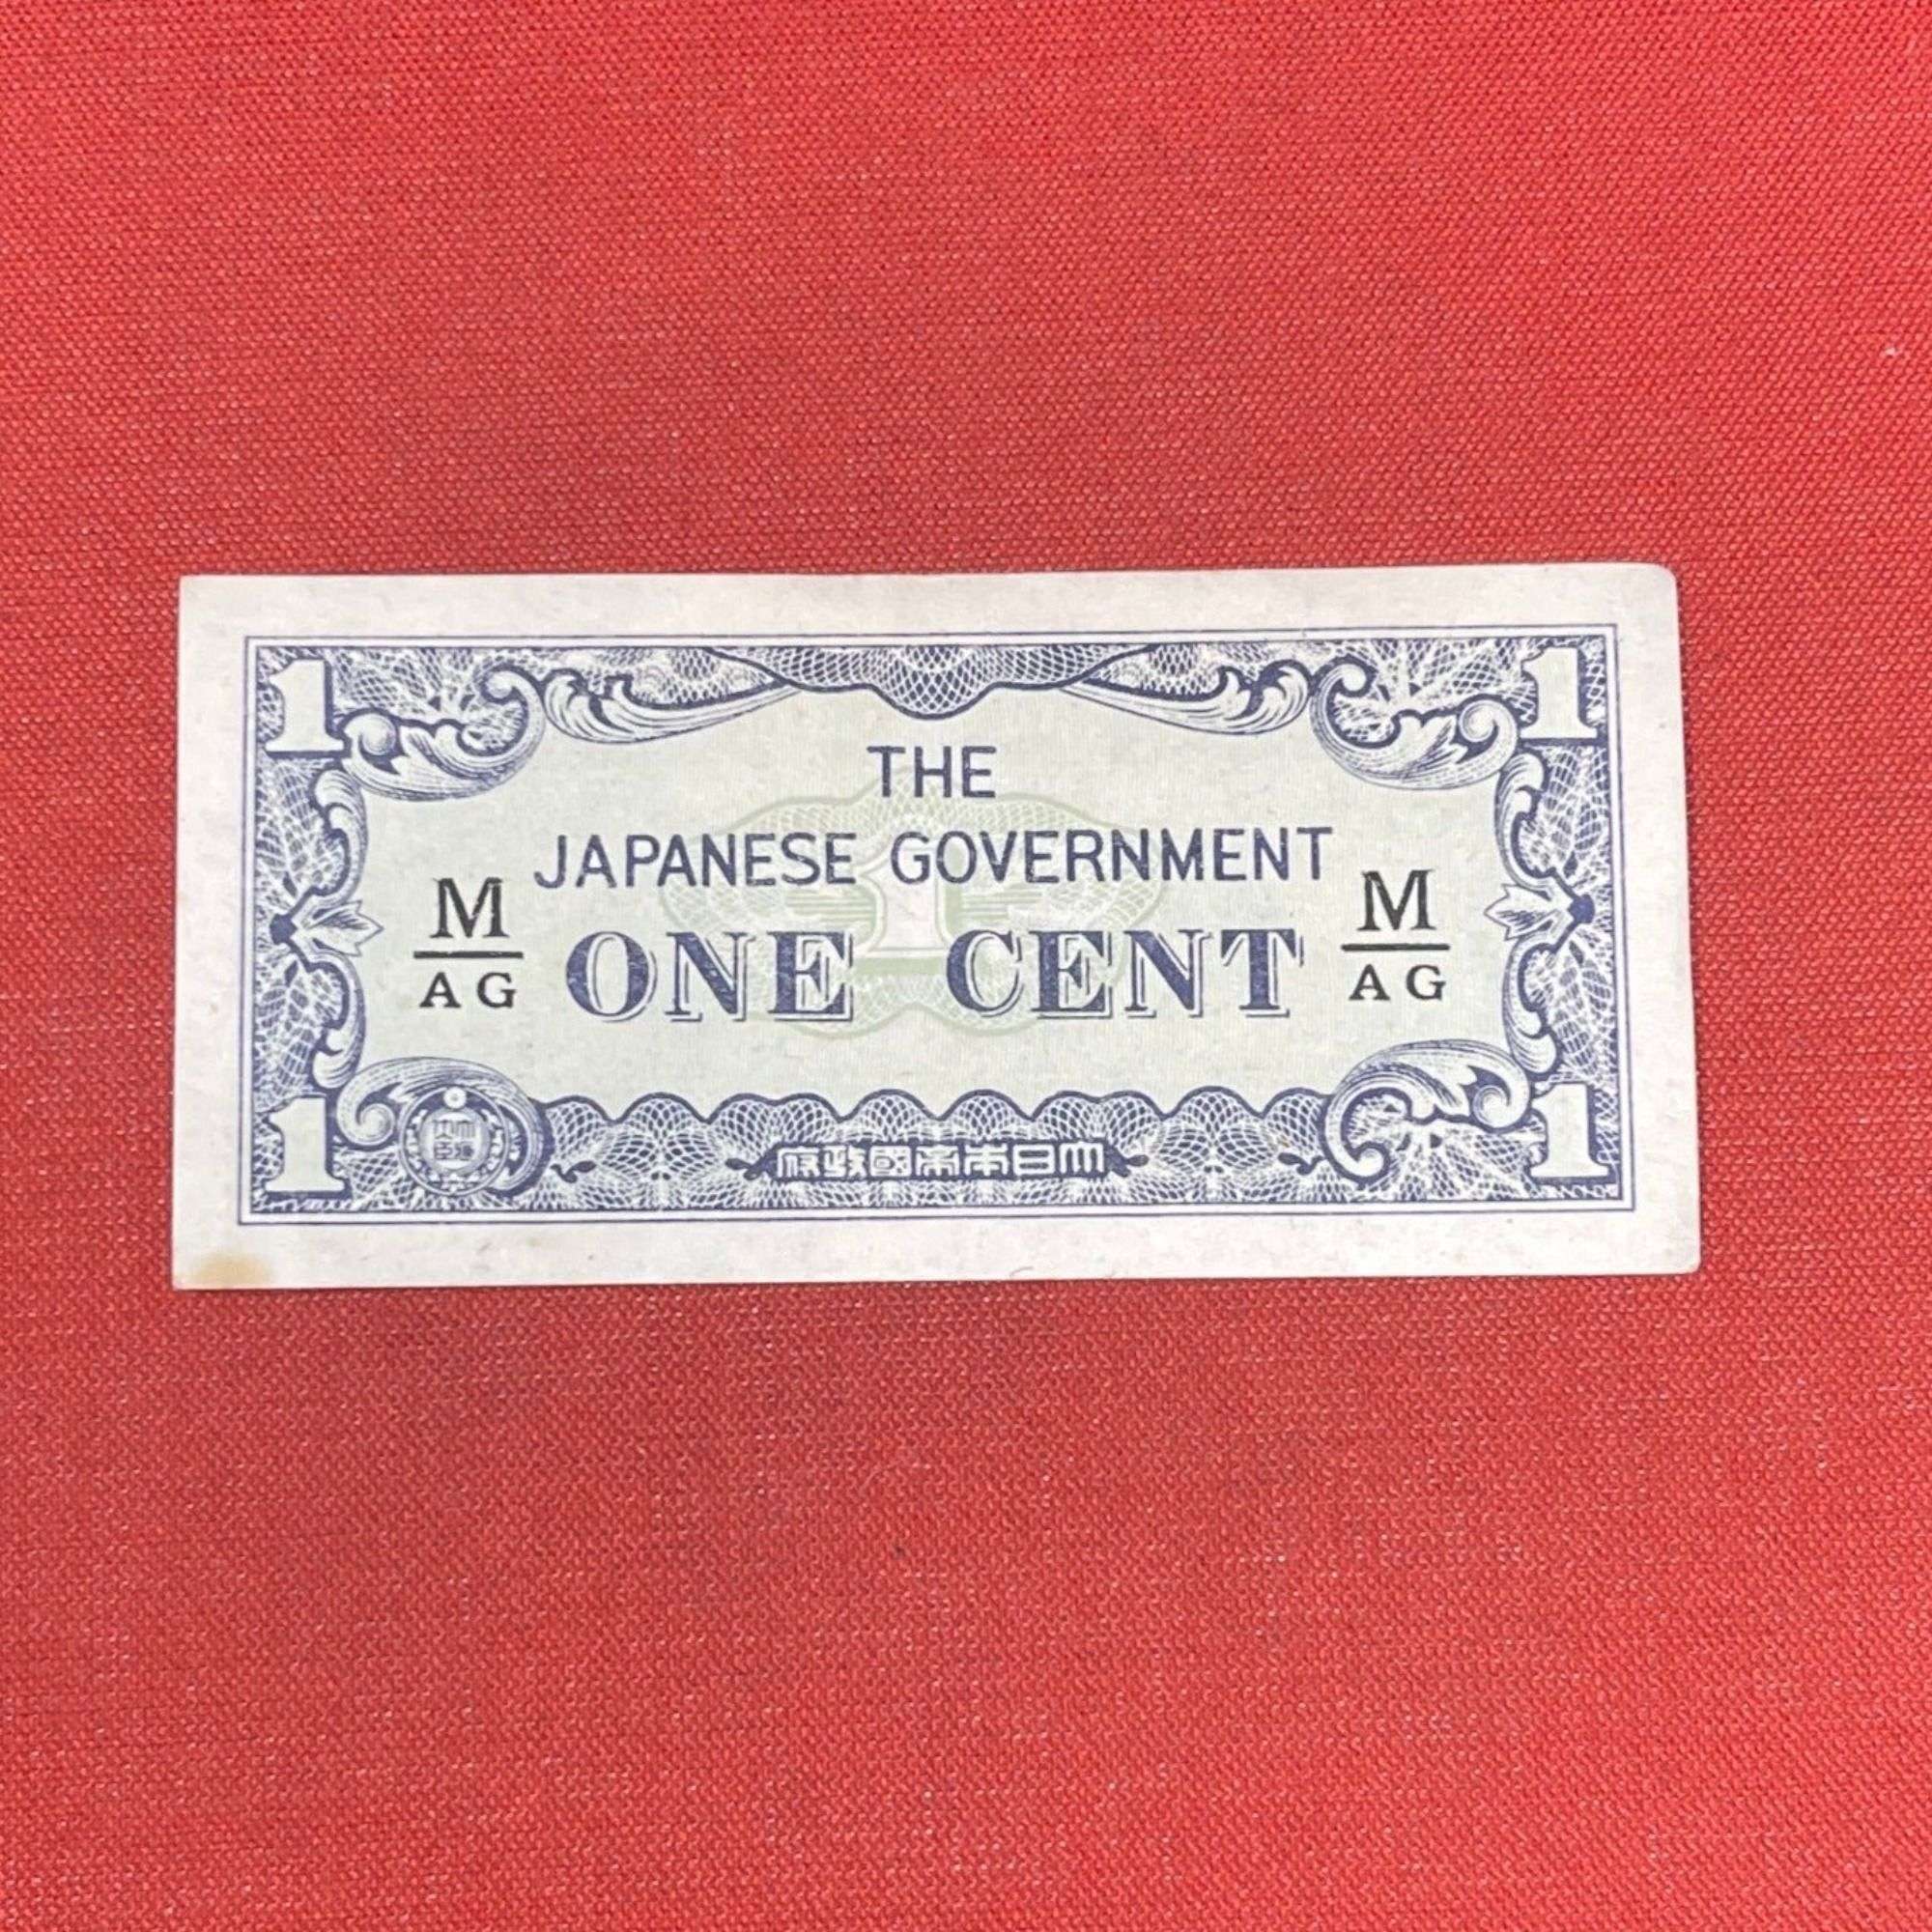 The Japanese Government 1 Cents Banknote Malaya